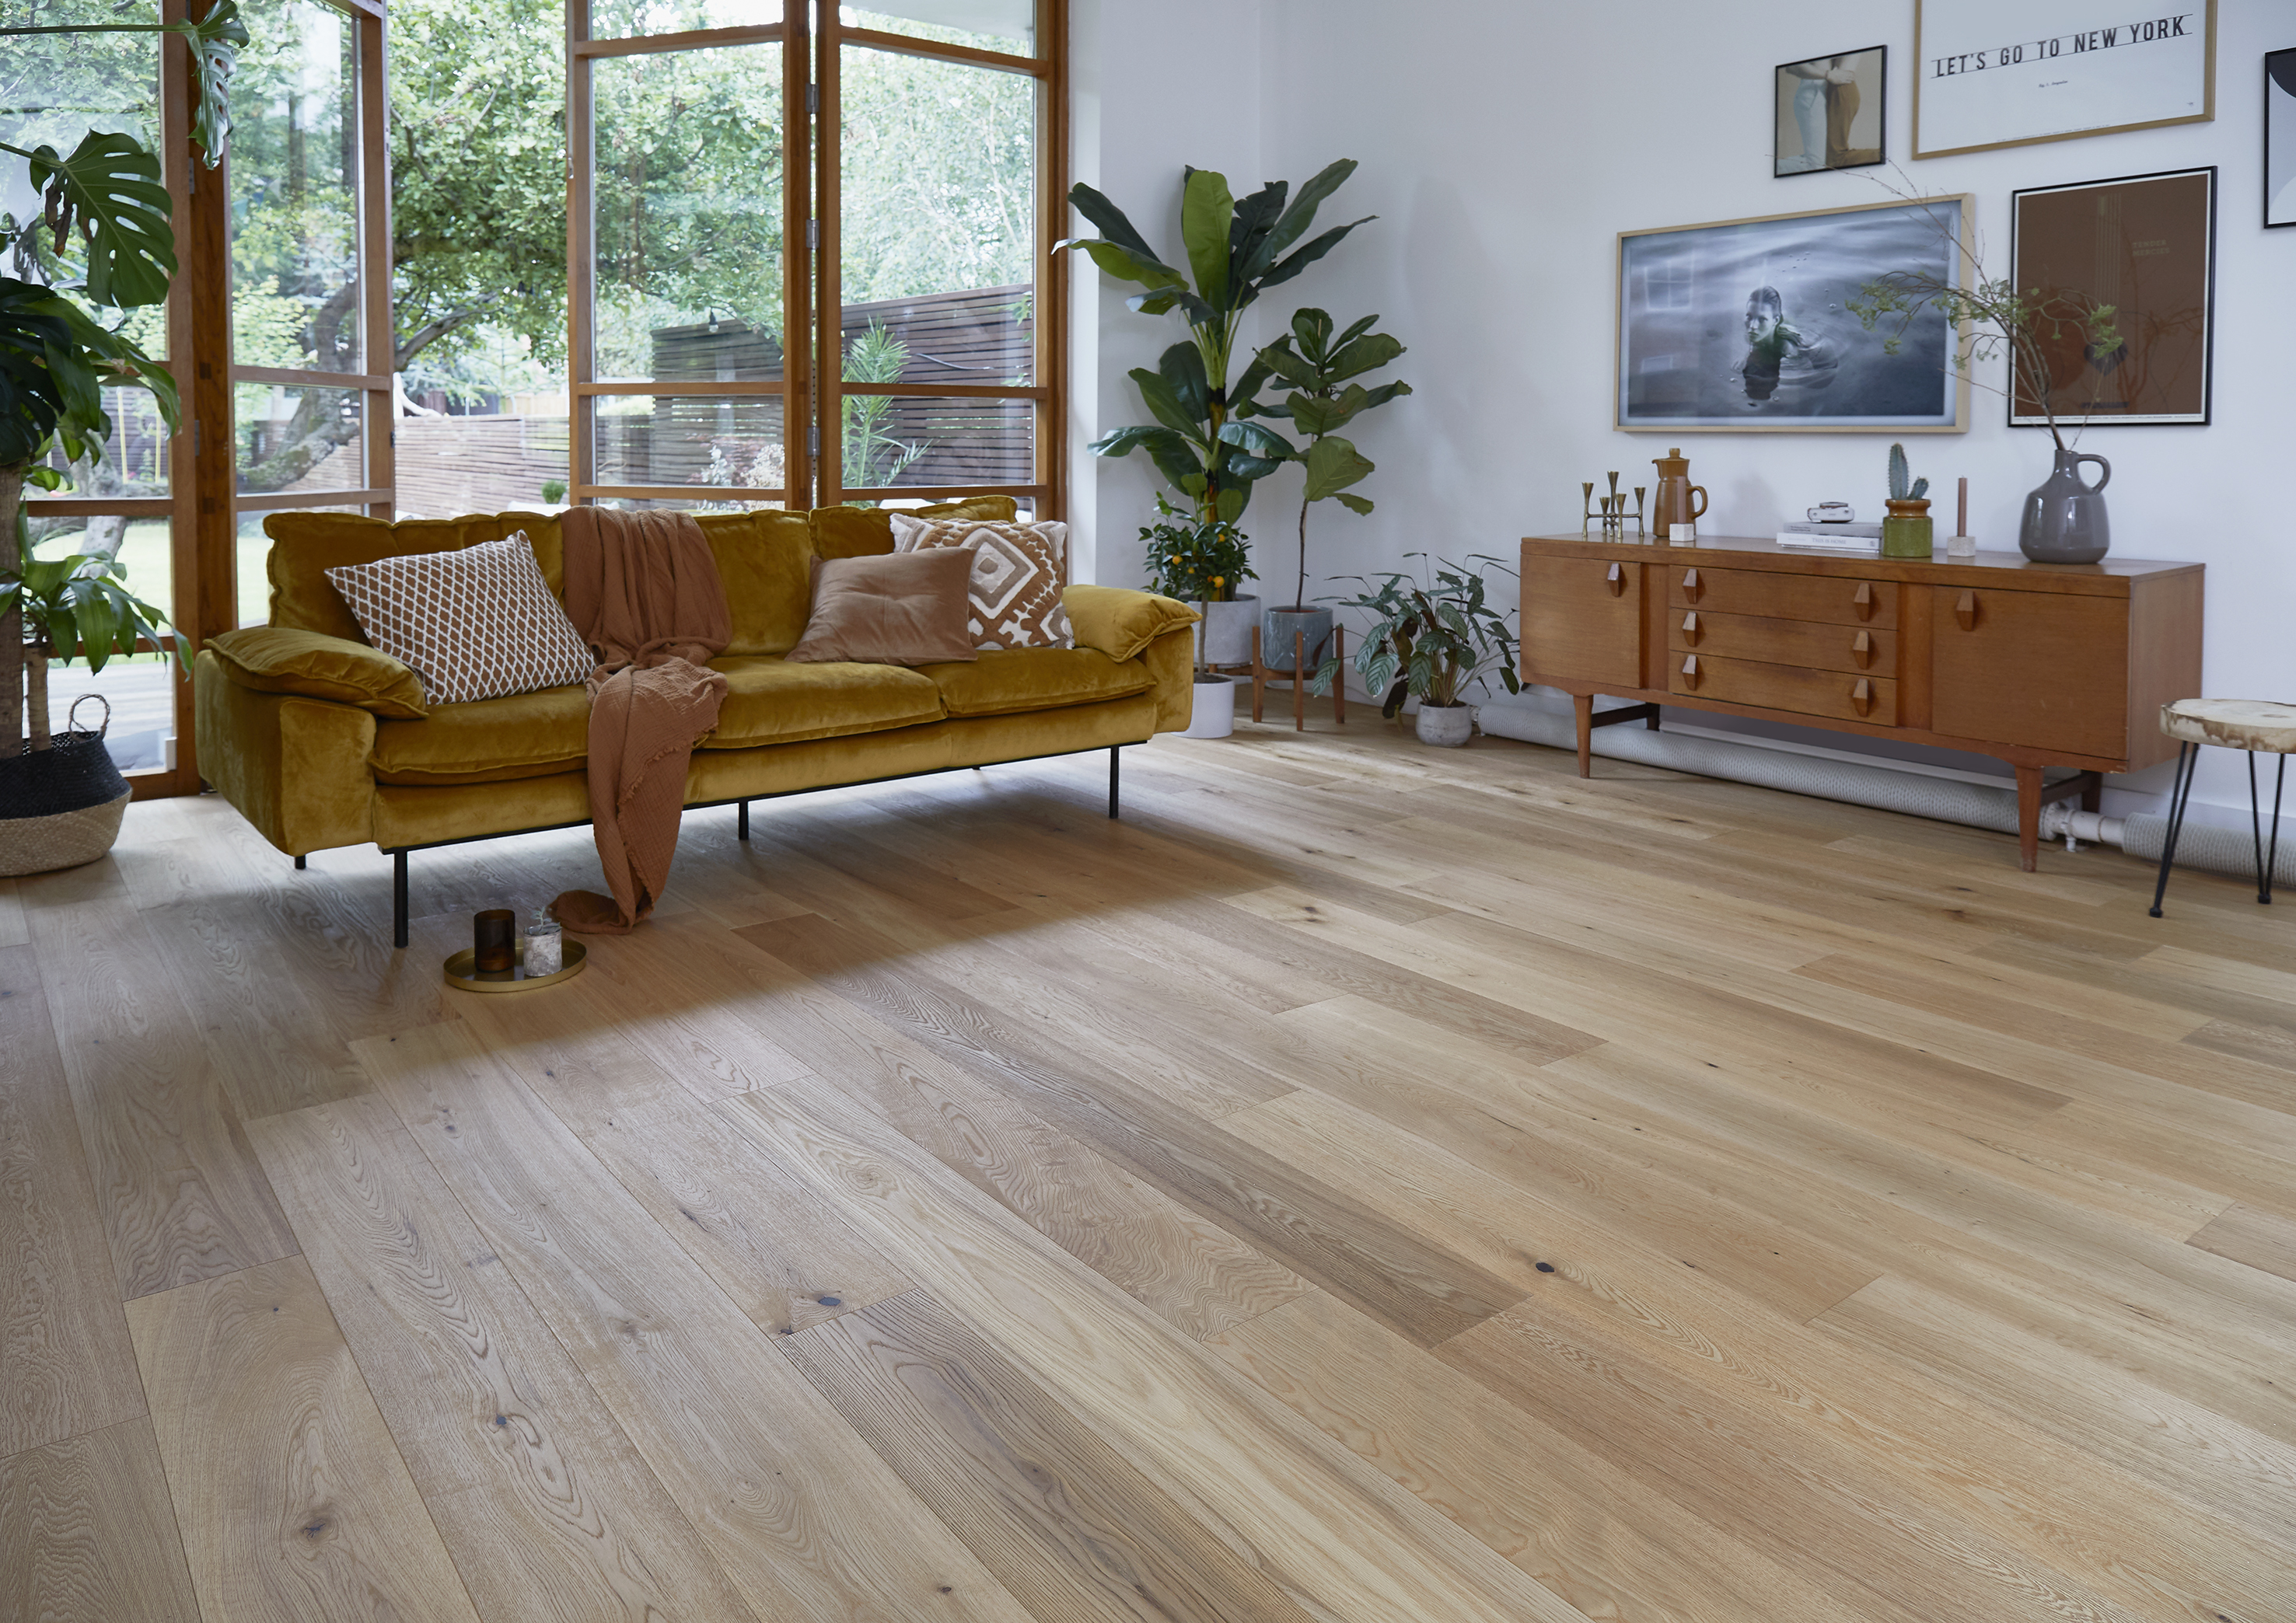 Types Of Flooring The Complete Guide, Best Flooring For High Traffic Wet Areas